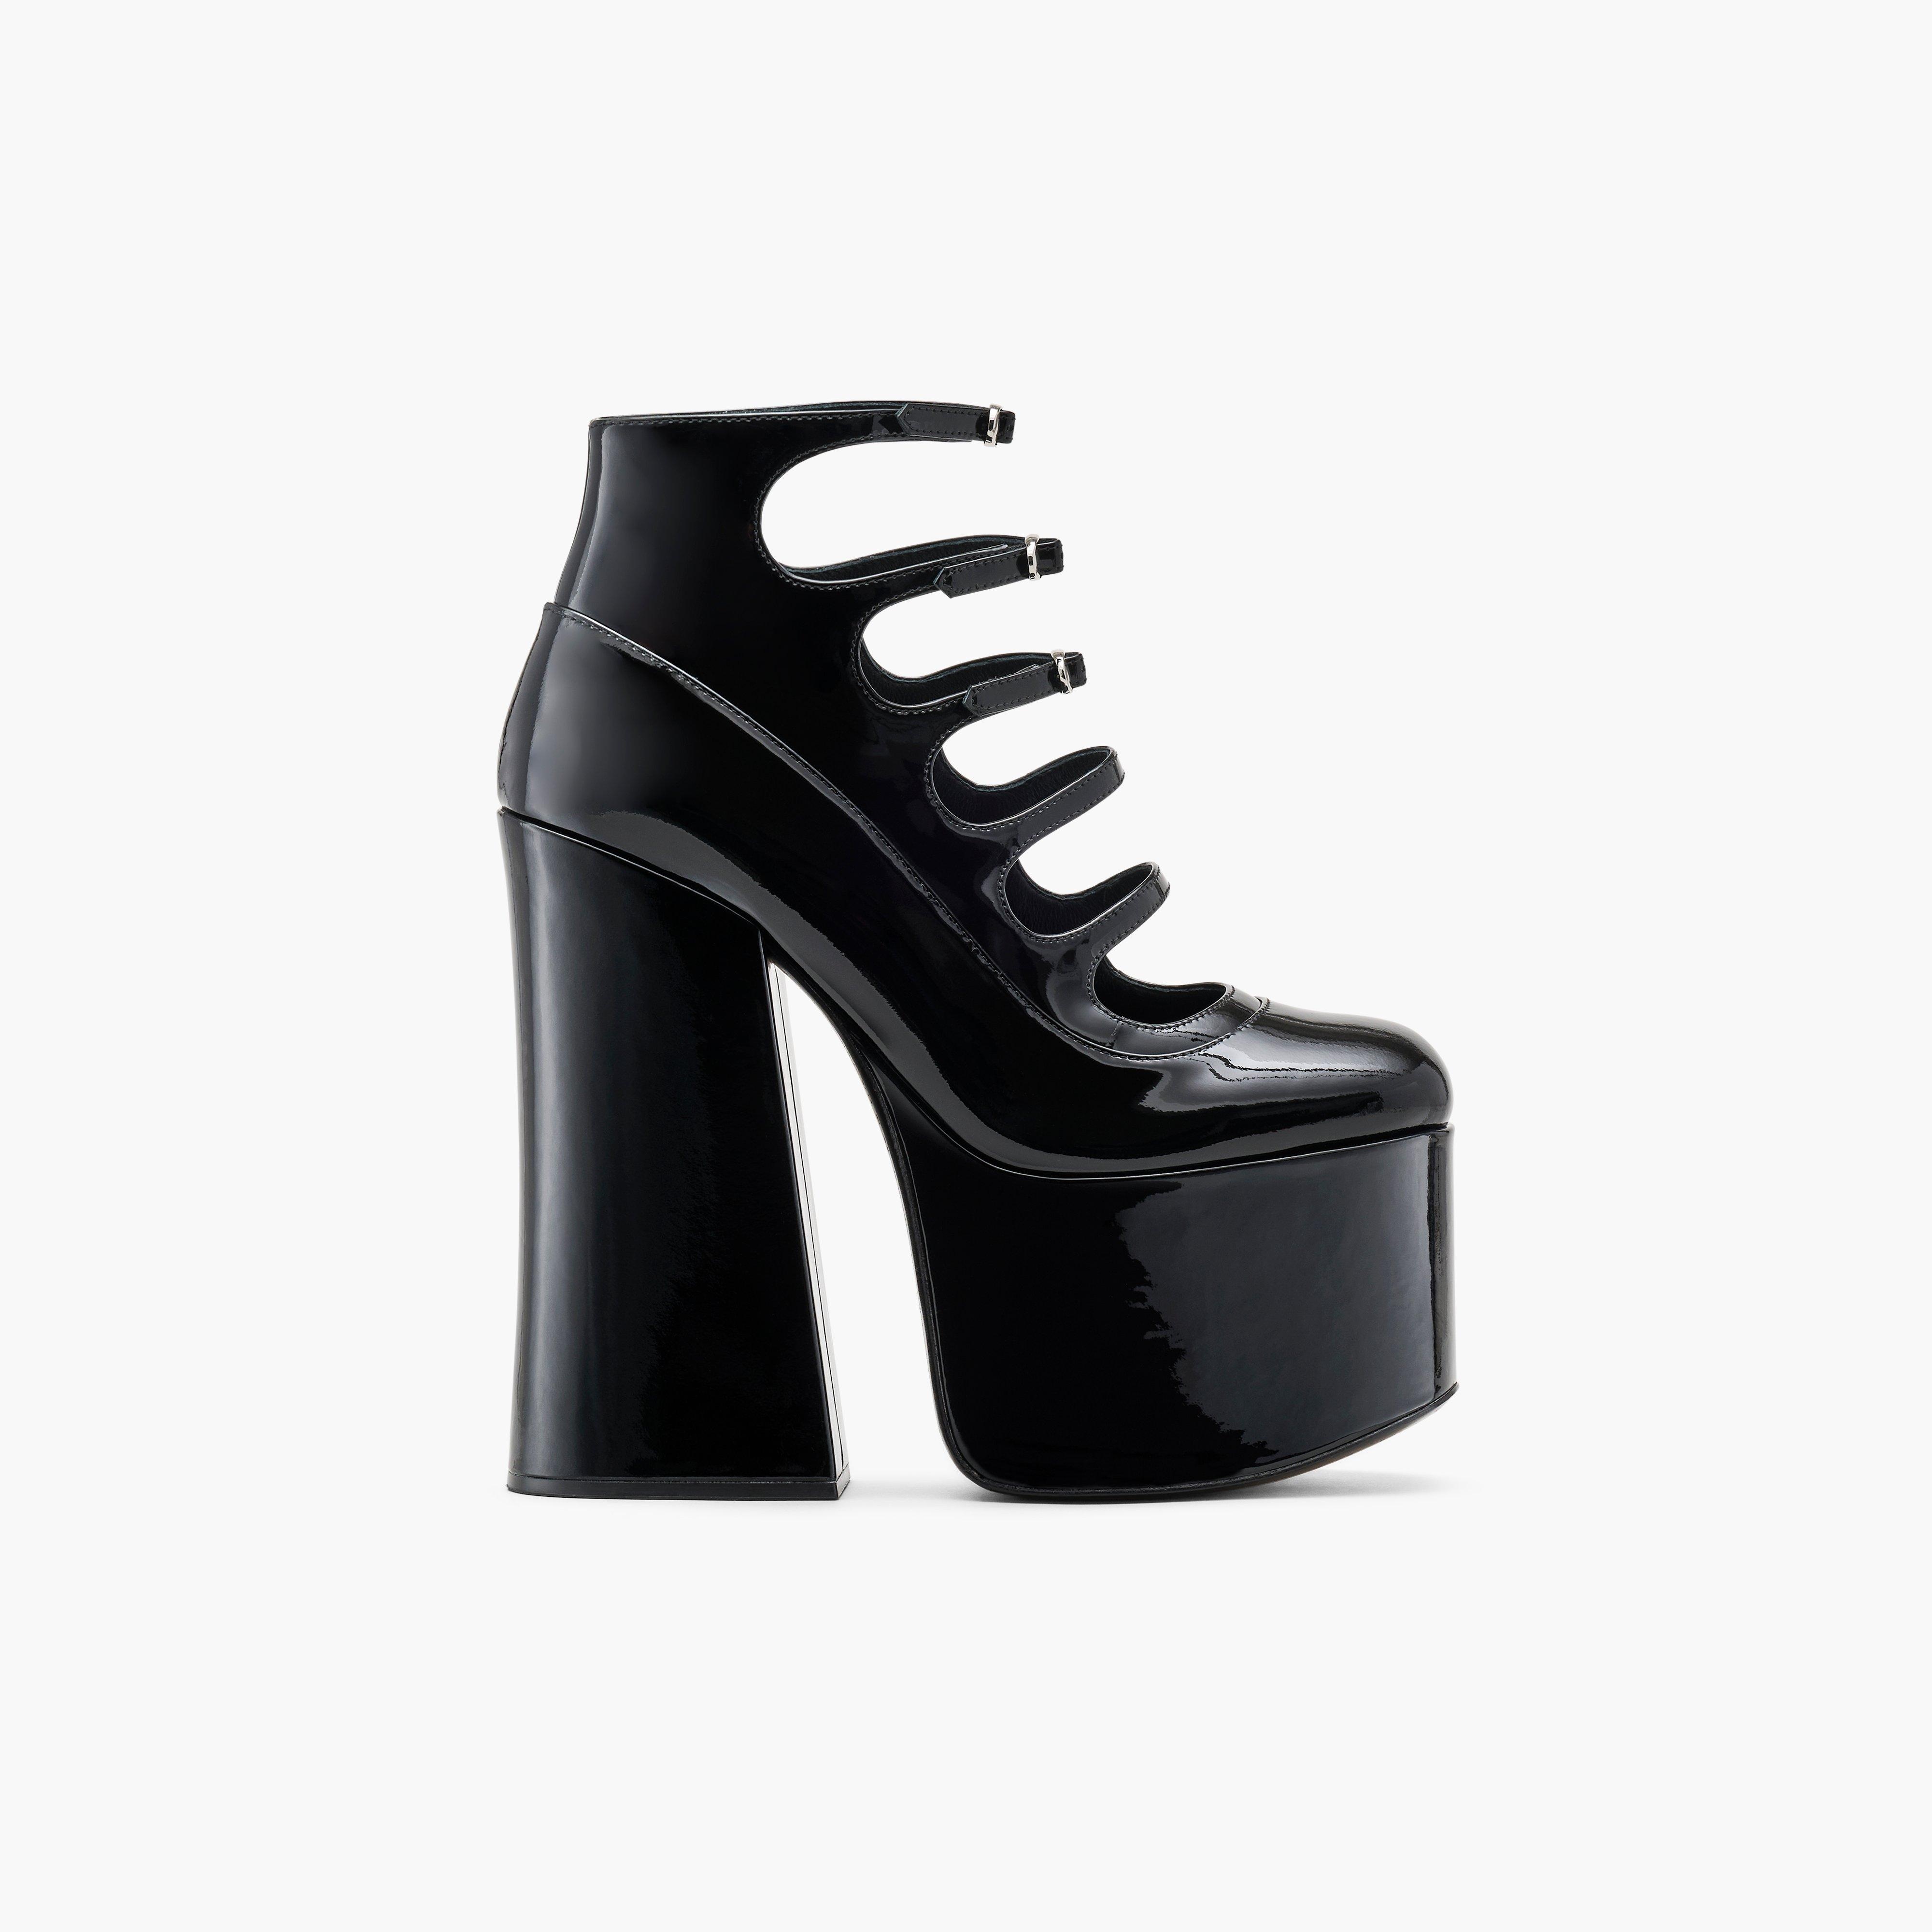 THE PATENT LEATHER KIKI ANKLE BOOT - 1